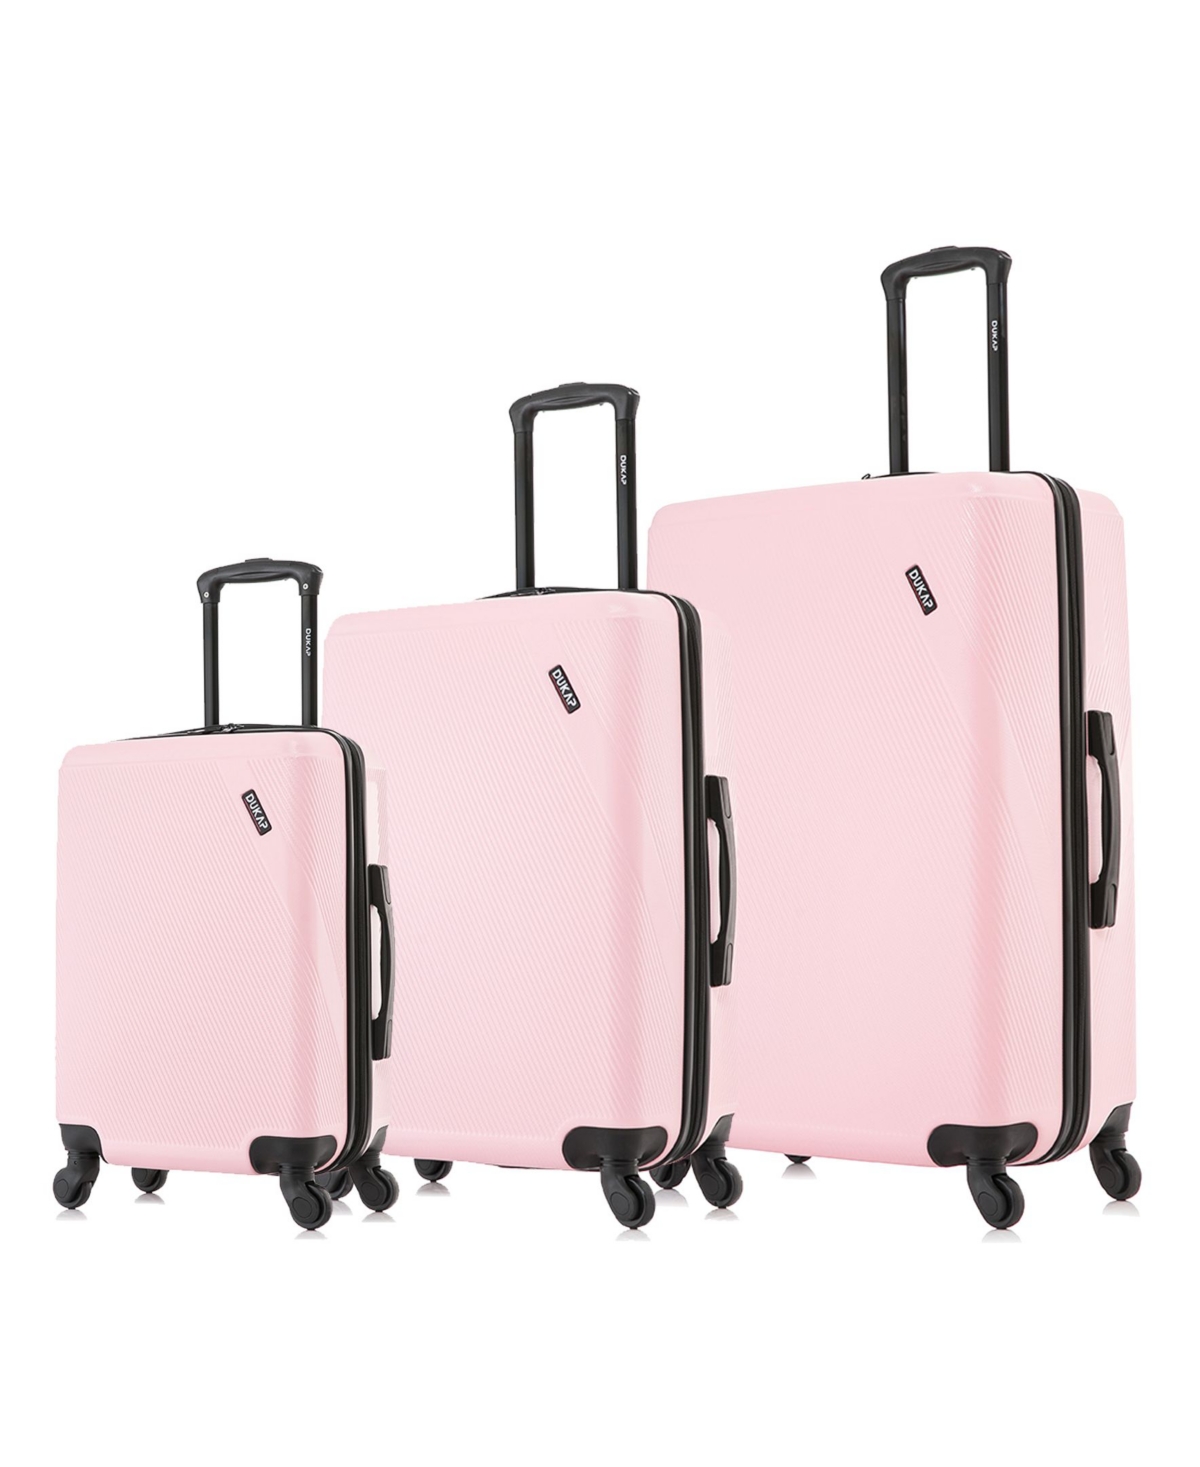 InUSA Discovery Lightweight Hardside Spinner Luggage Set, 3 piece - Pink